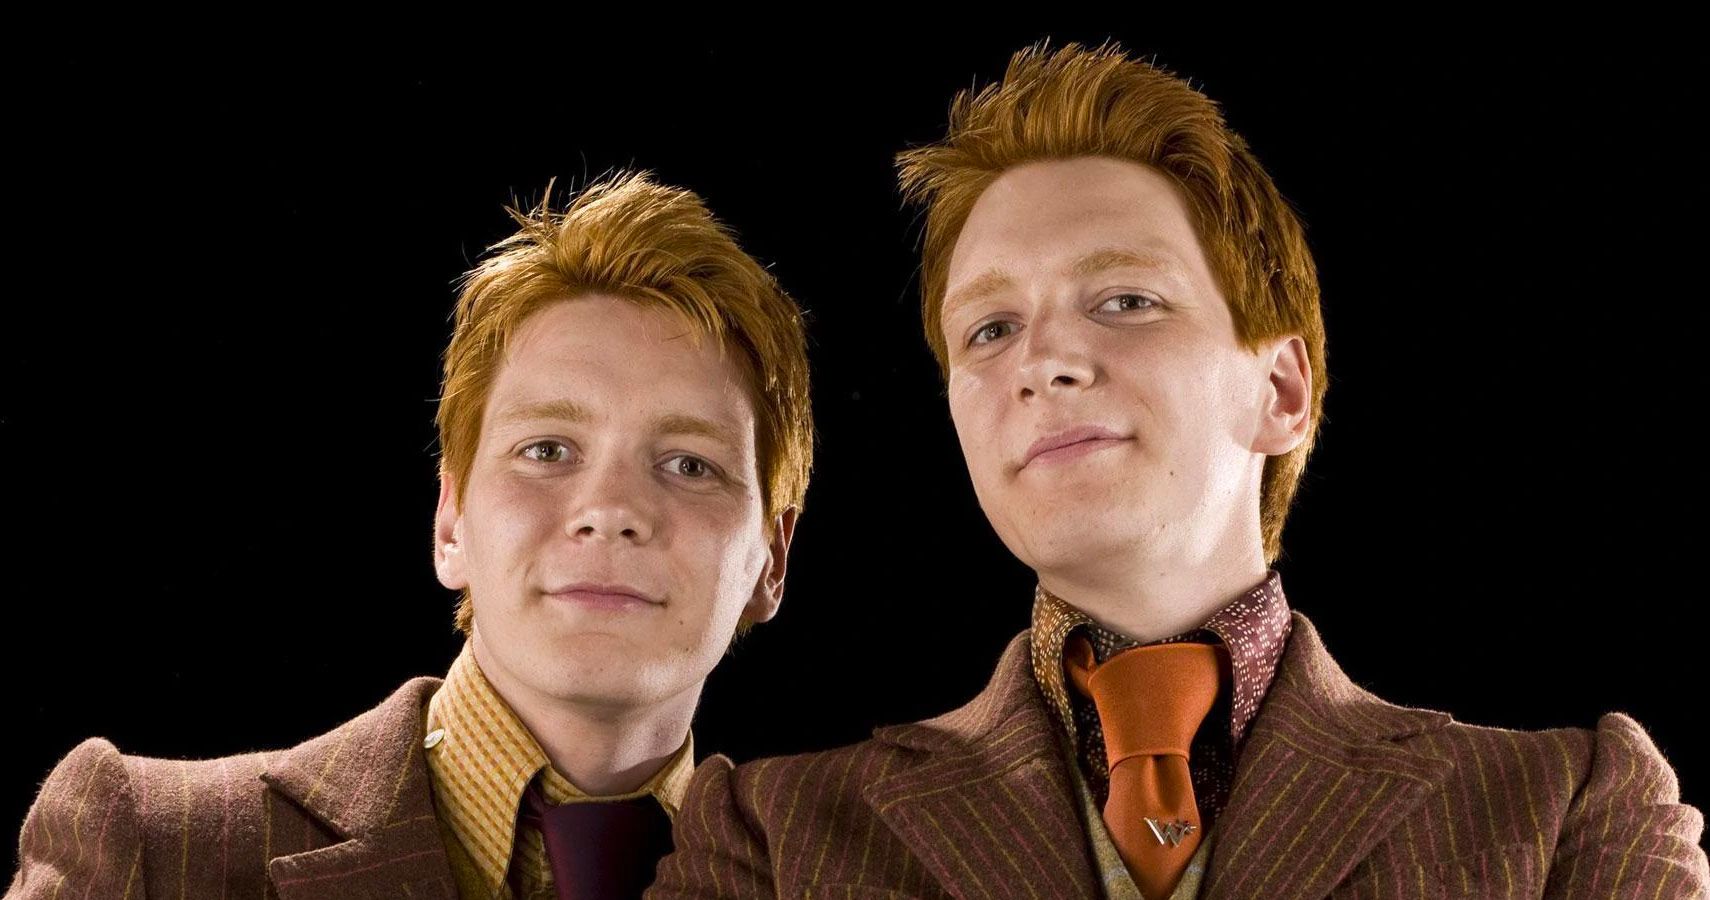 James and oliver phelps play the weasley twins, fred and george, in the har...